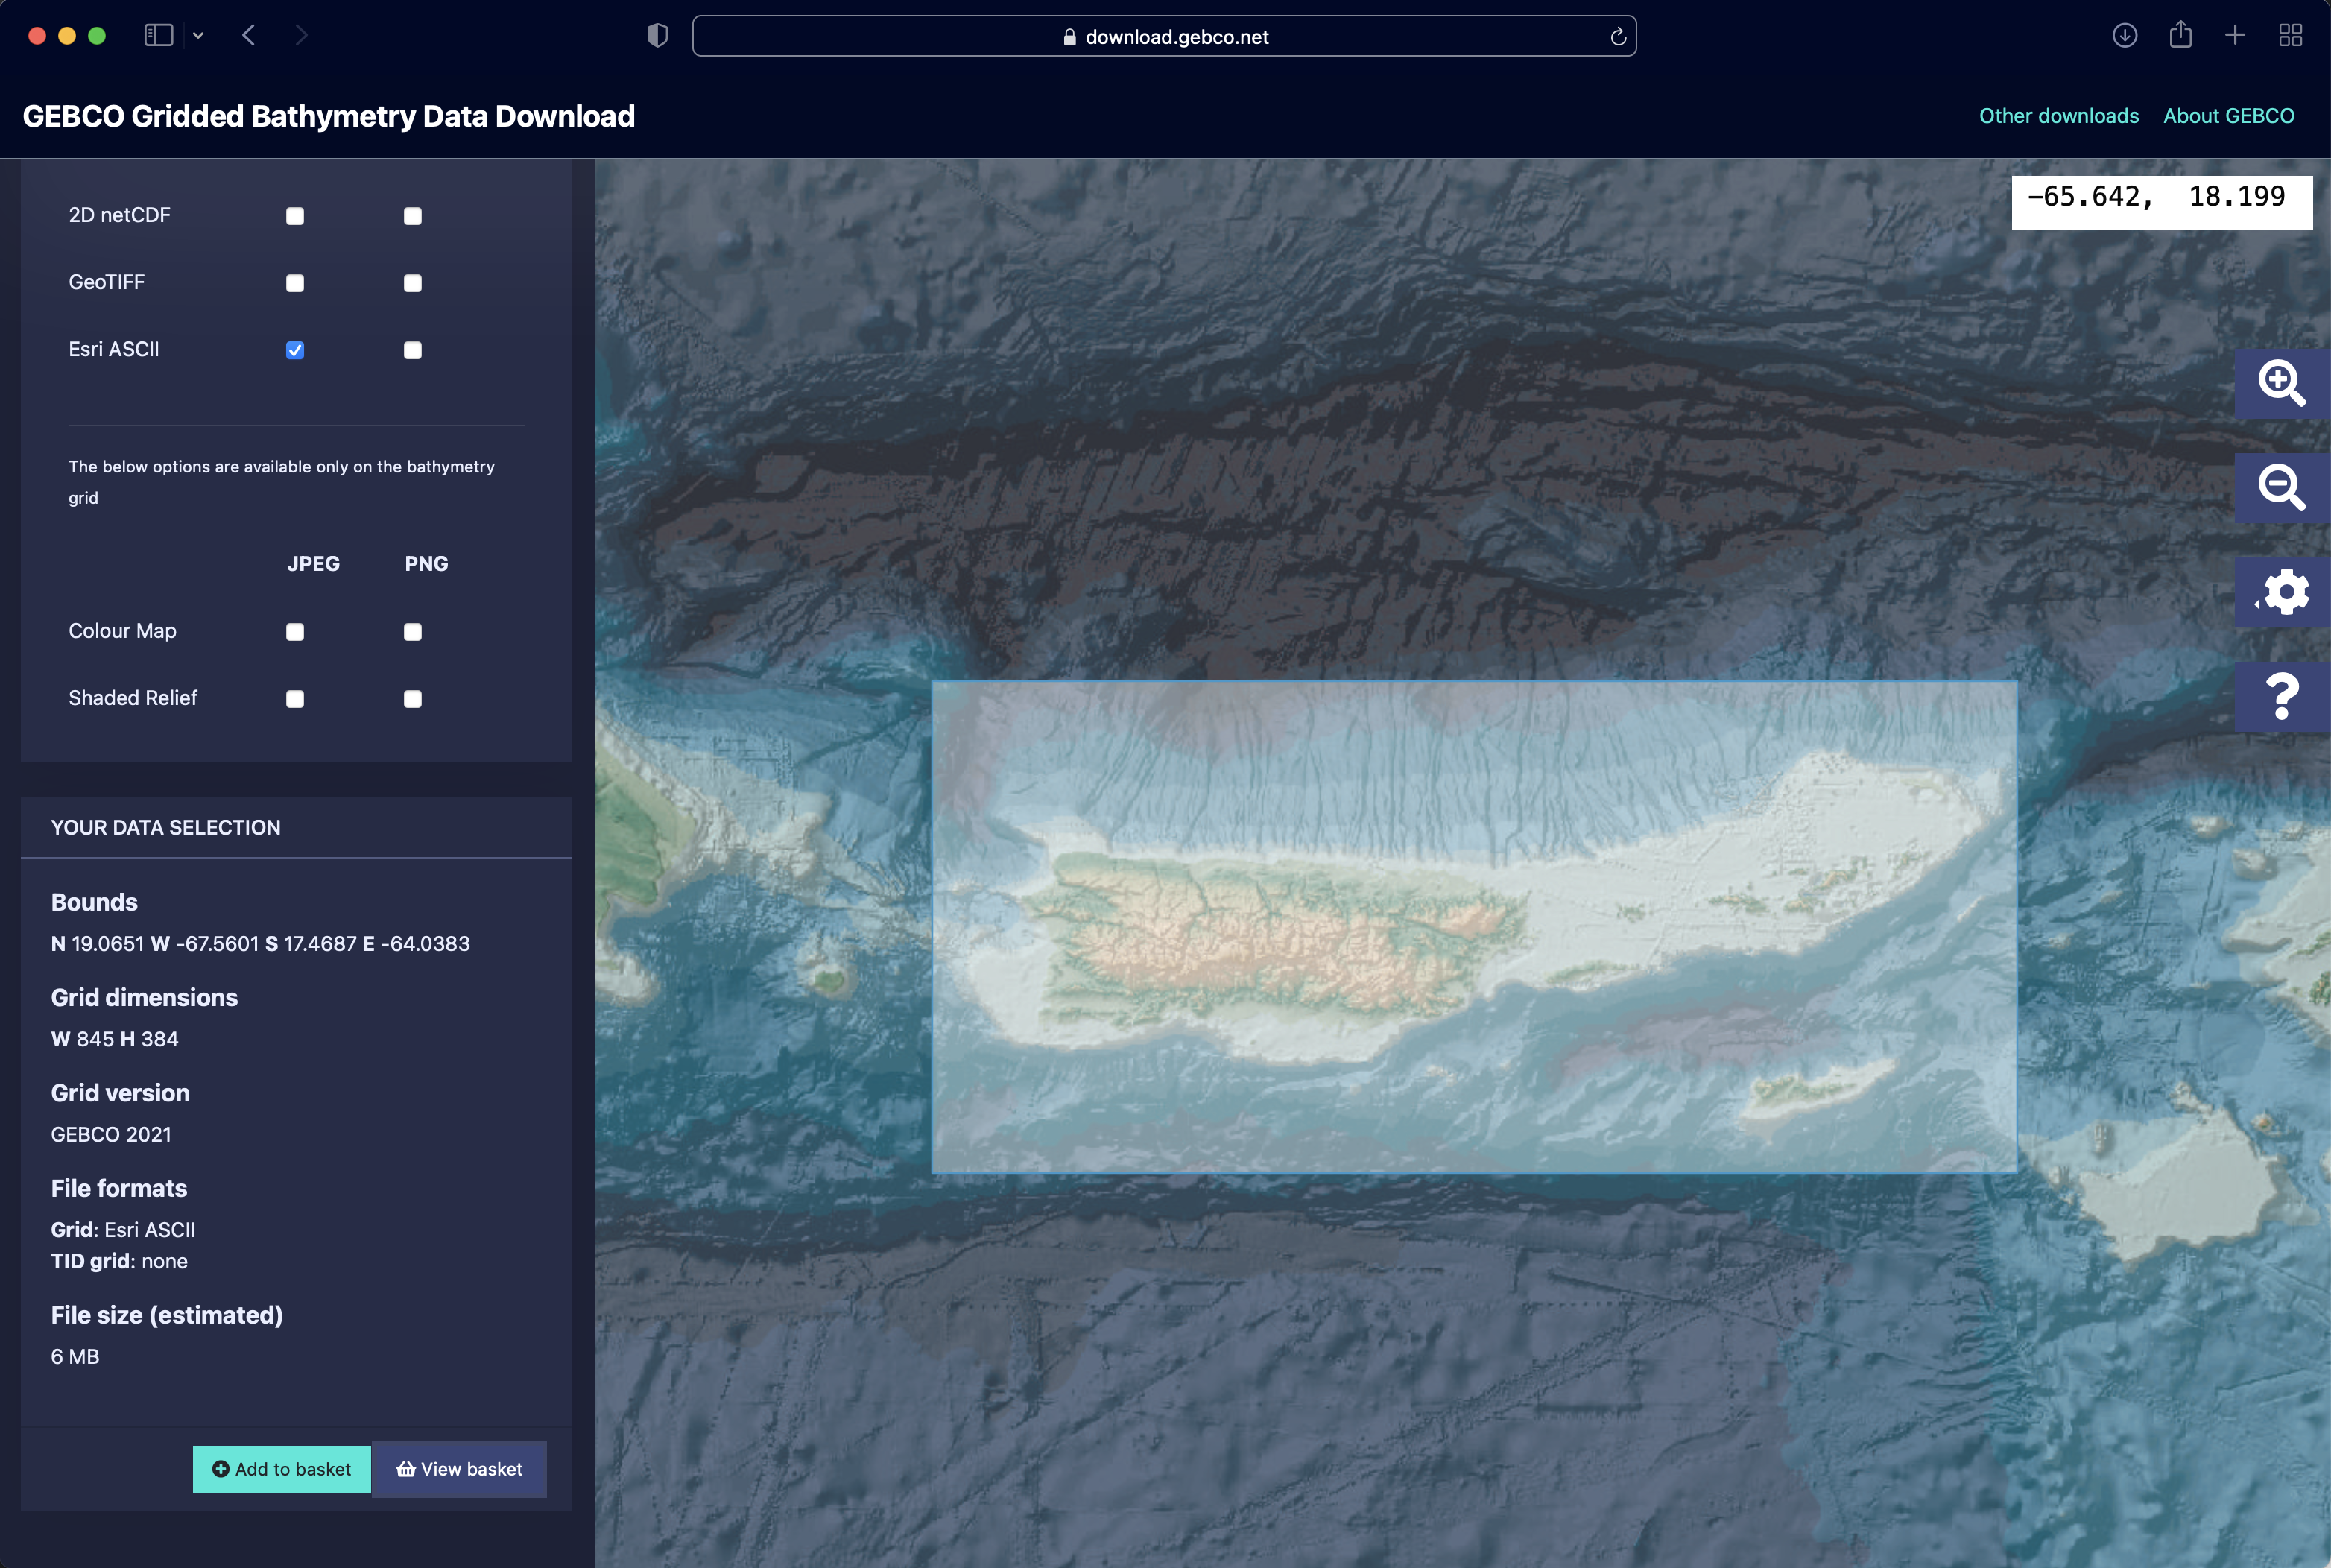 Download bathymetry map of Puerto Rico and the Virgin Islands from the GEBCO website